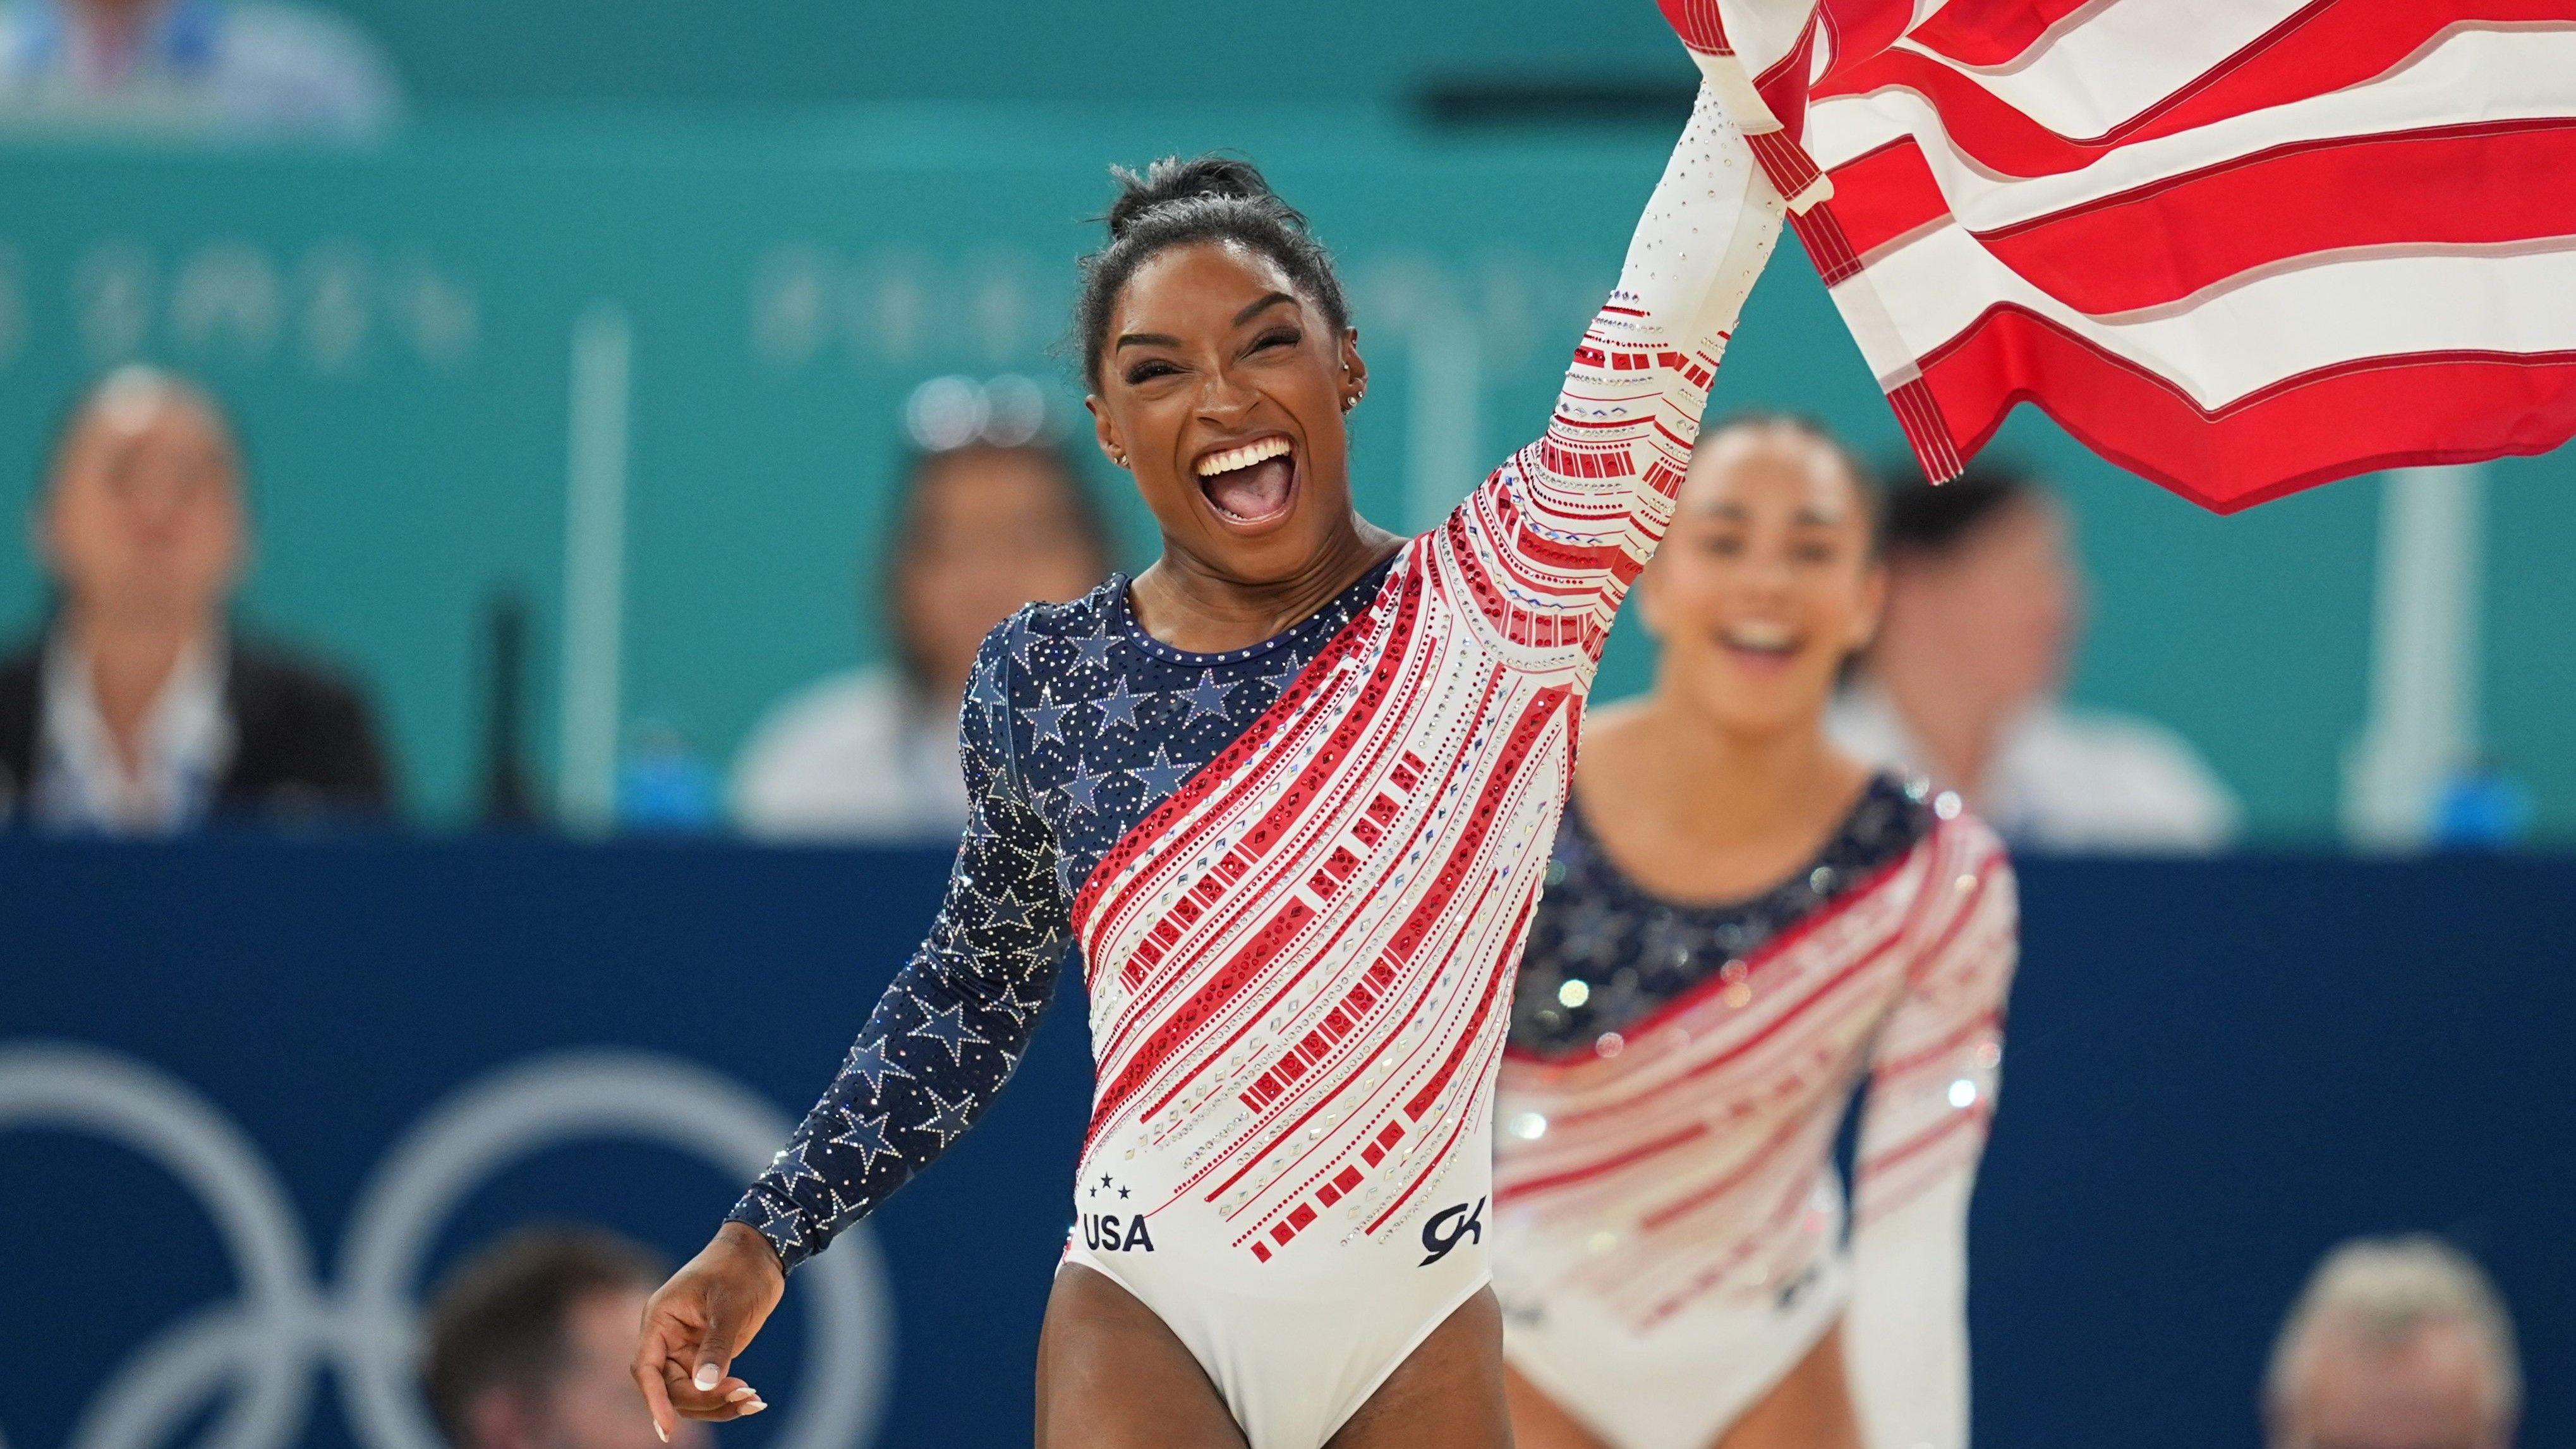 No flashbacks - the moment Biles was sure about gold